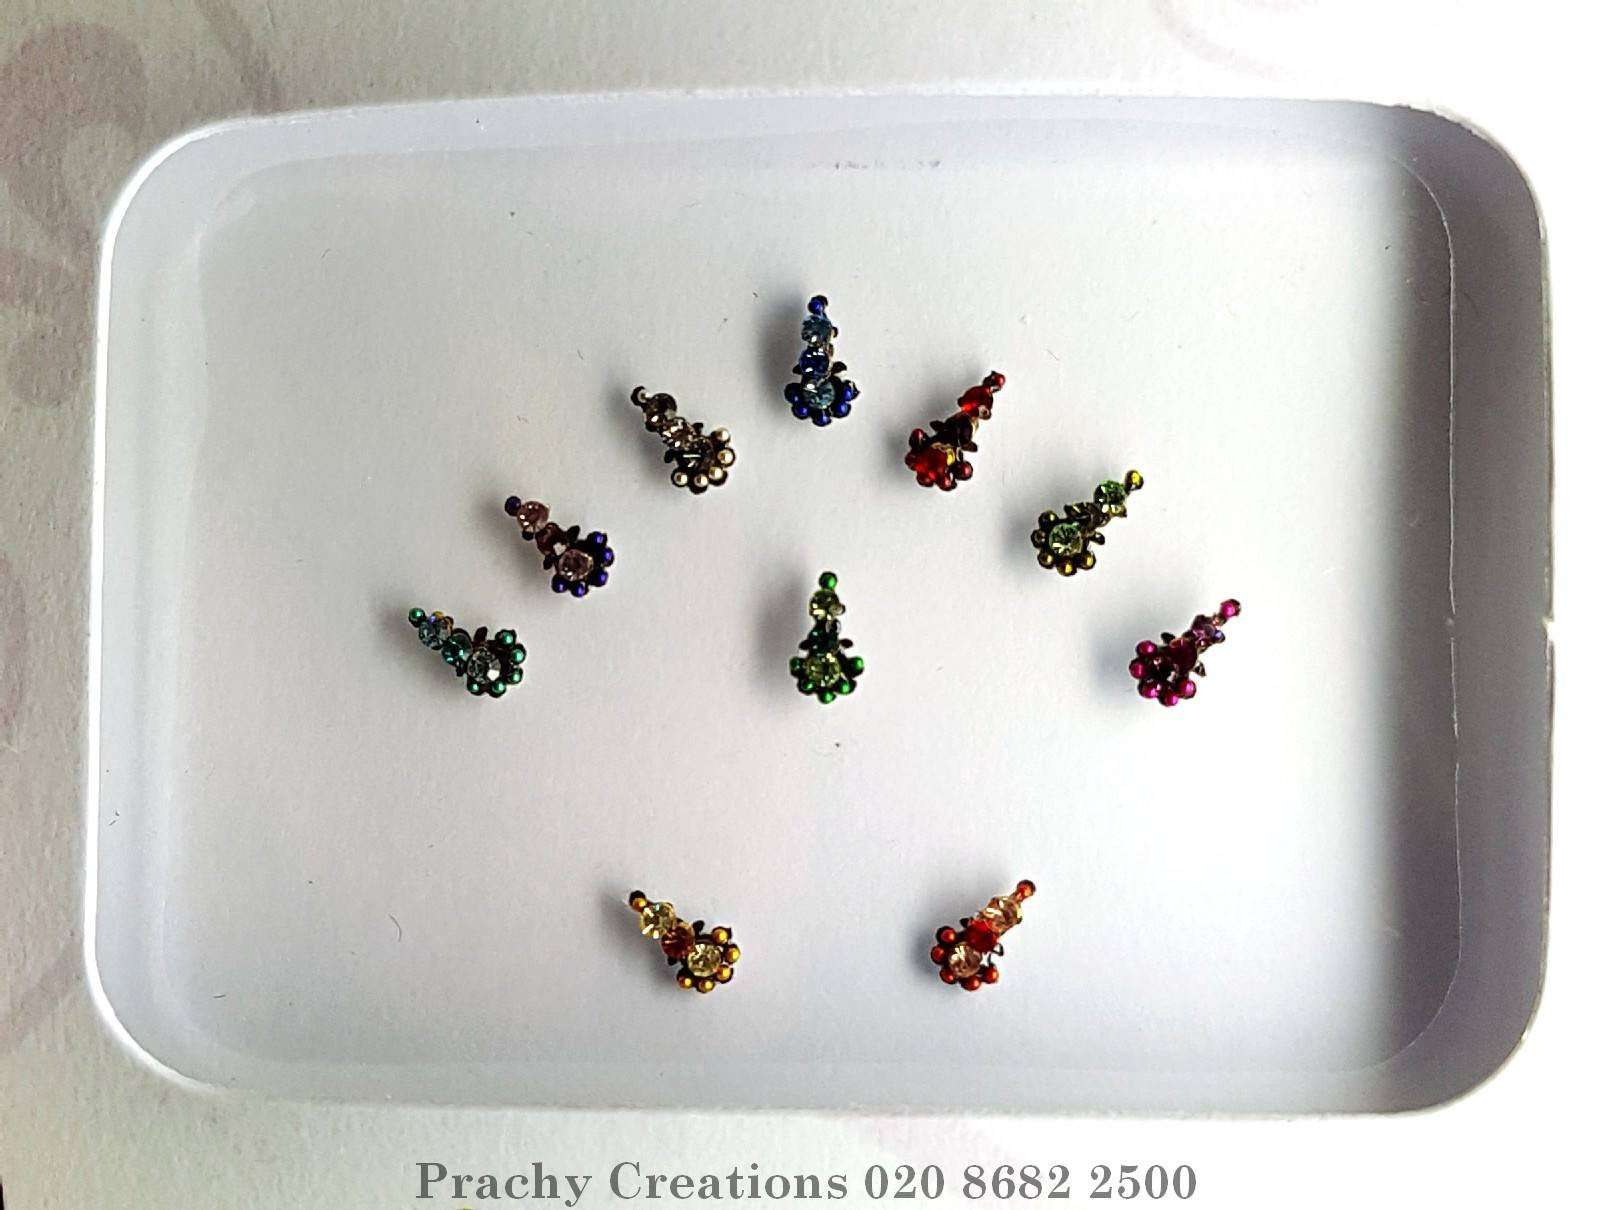 Pack of 10 various colour Bindis in small size- 24 hrs dispatch from UK RR1027 rp - Prachy Creations